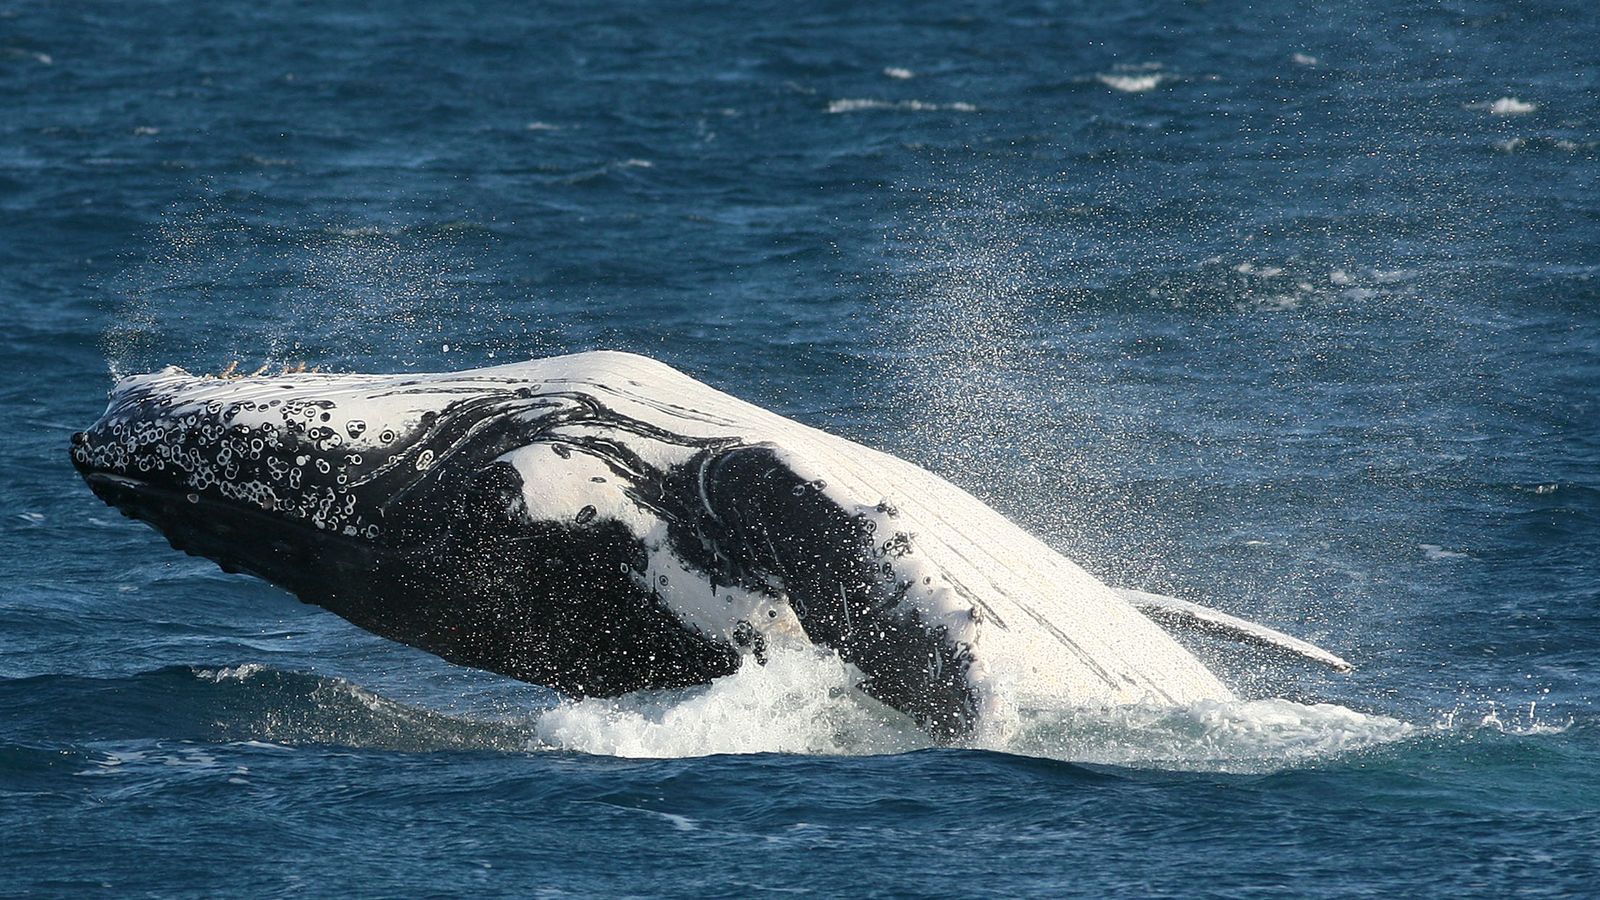 Man dies after whale flips boat in Australia in 'absolute freak accident'